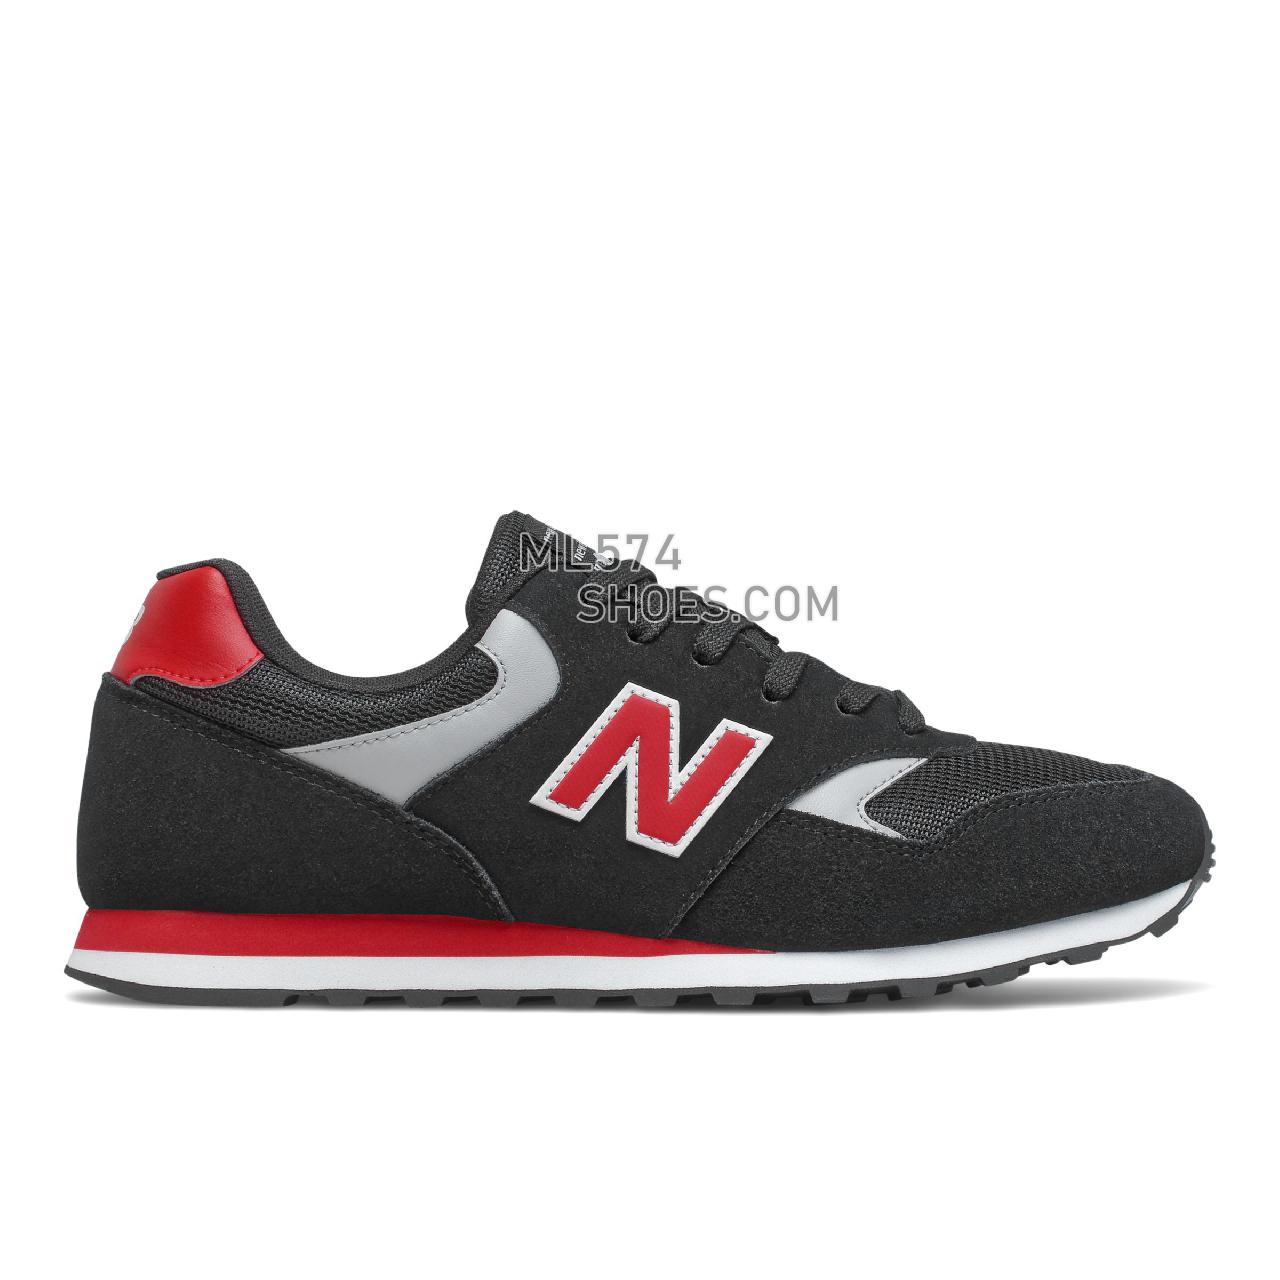 New Balance 393 - Men's Classic Sneakers - Black with Team Red - ML393VI1